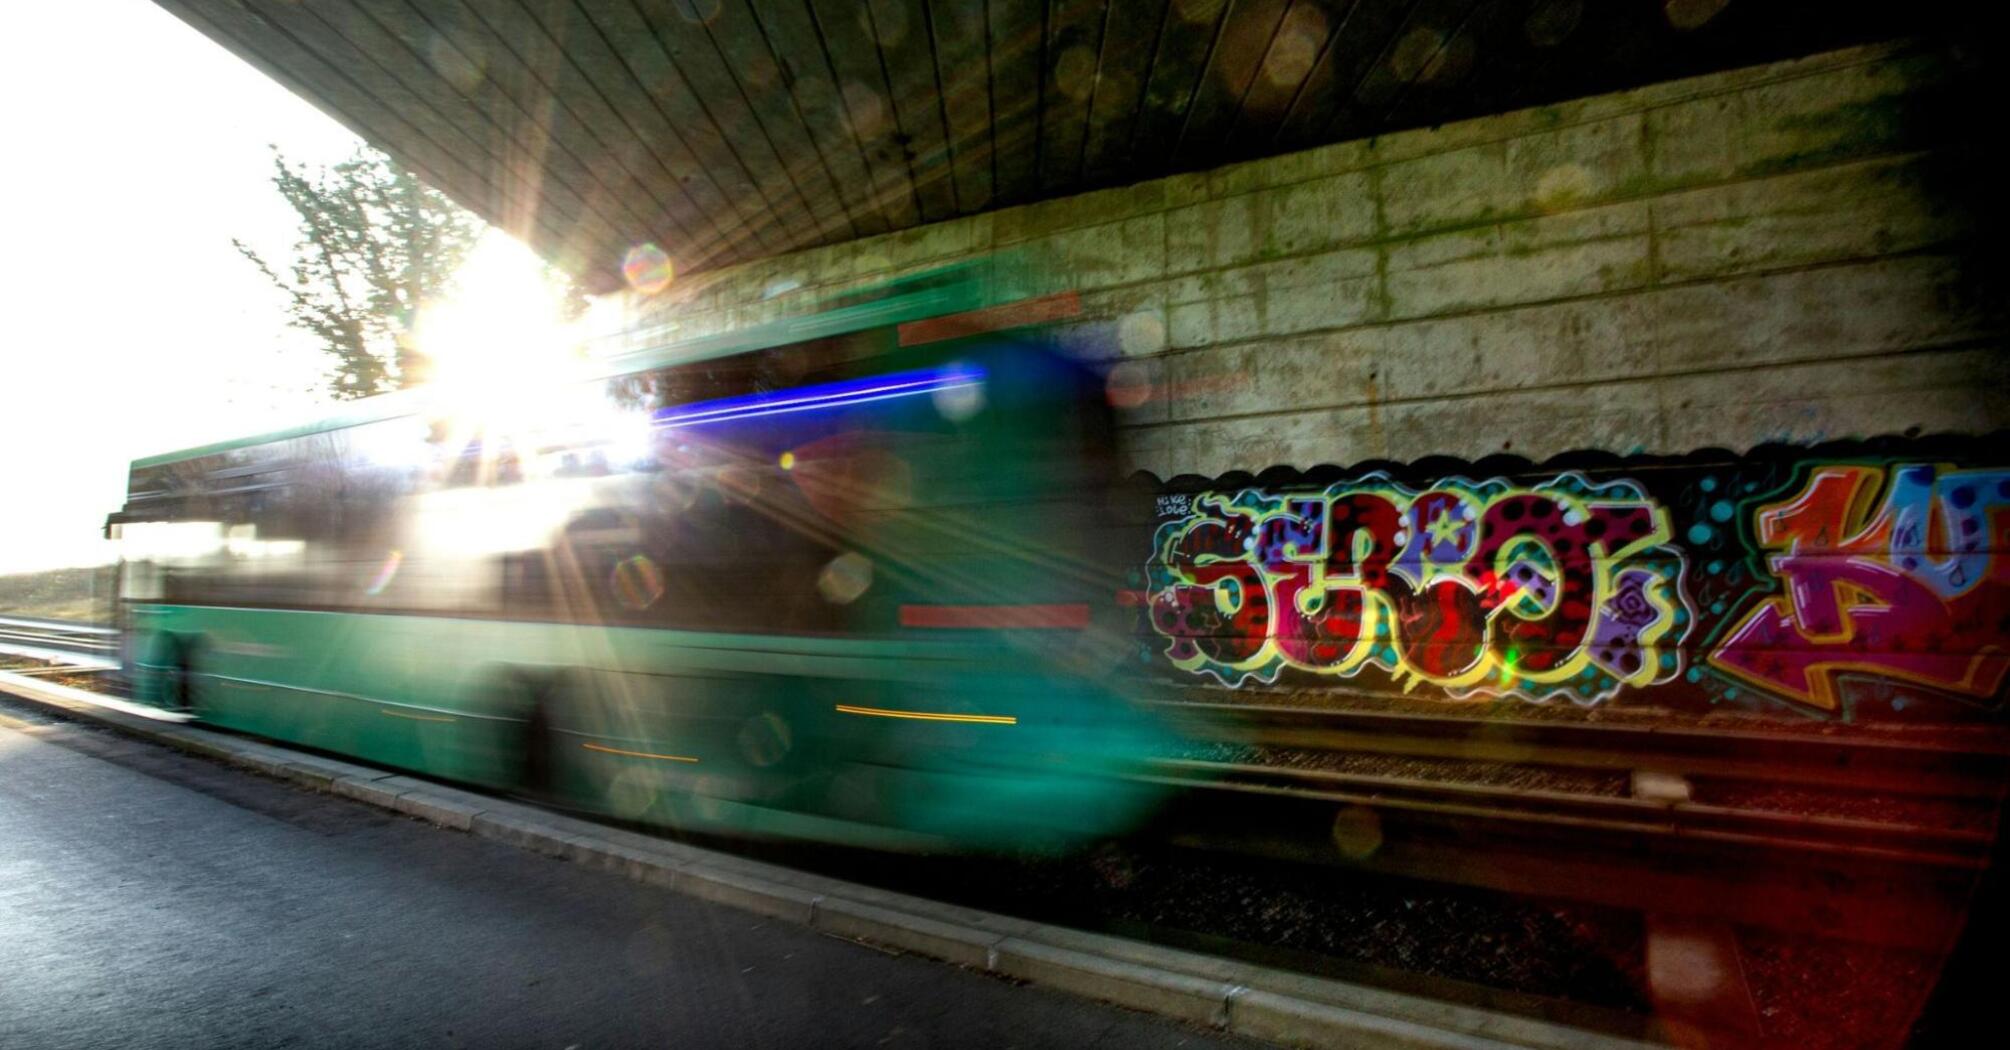 A green Stagecoach bus passing under a graffiti-covered bridge at sunset